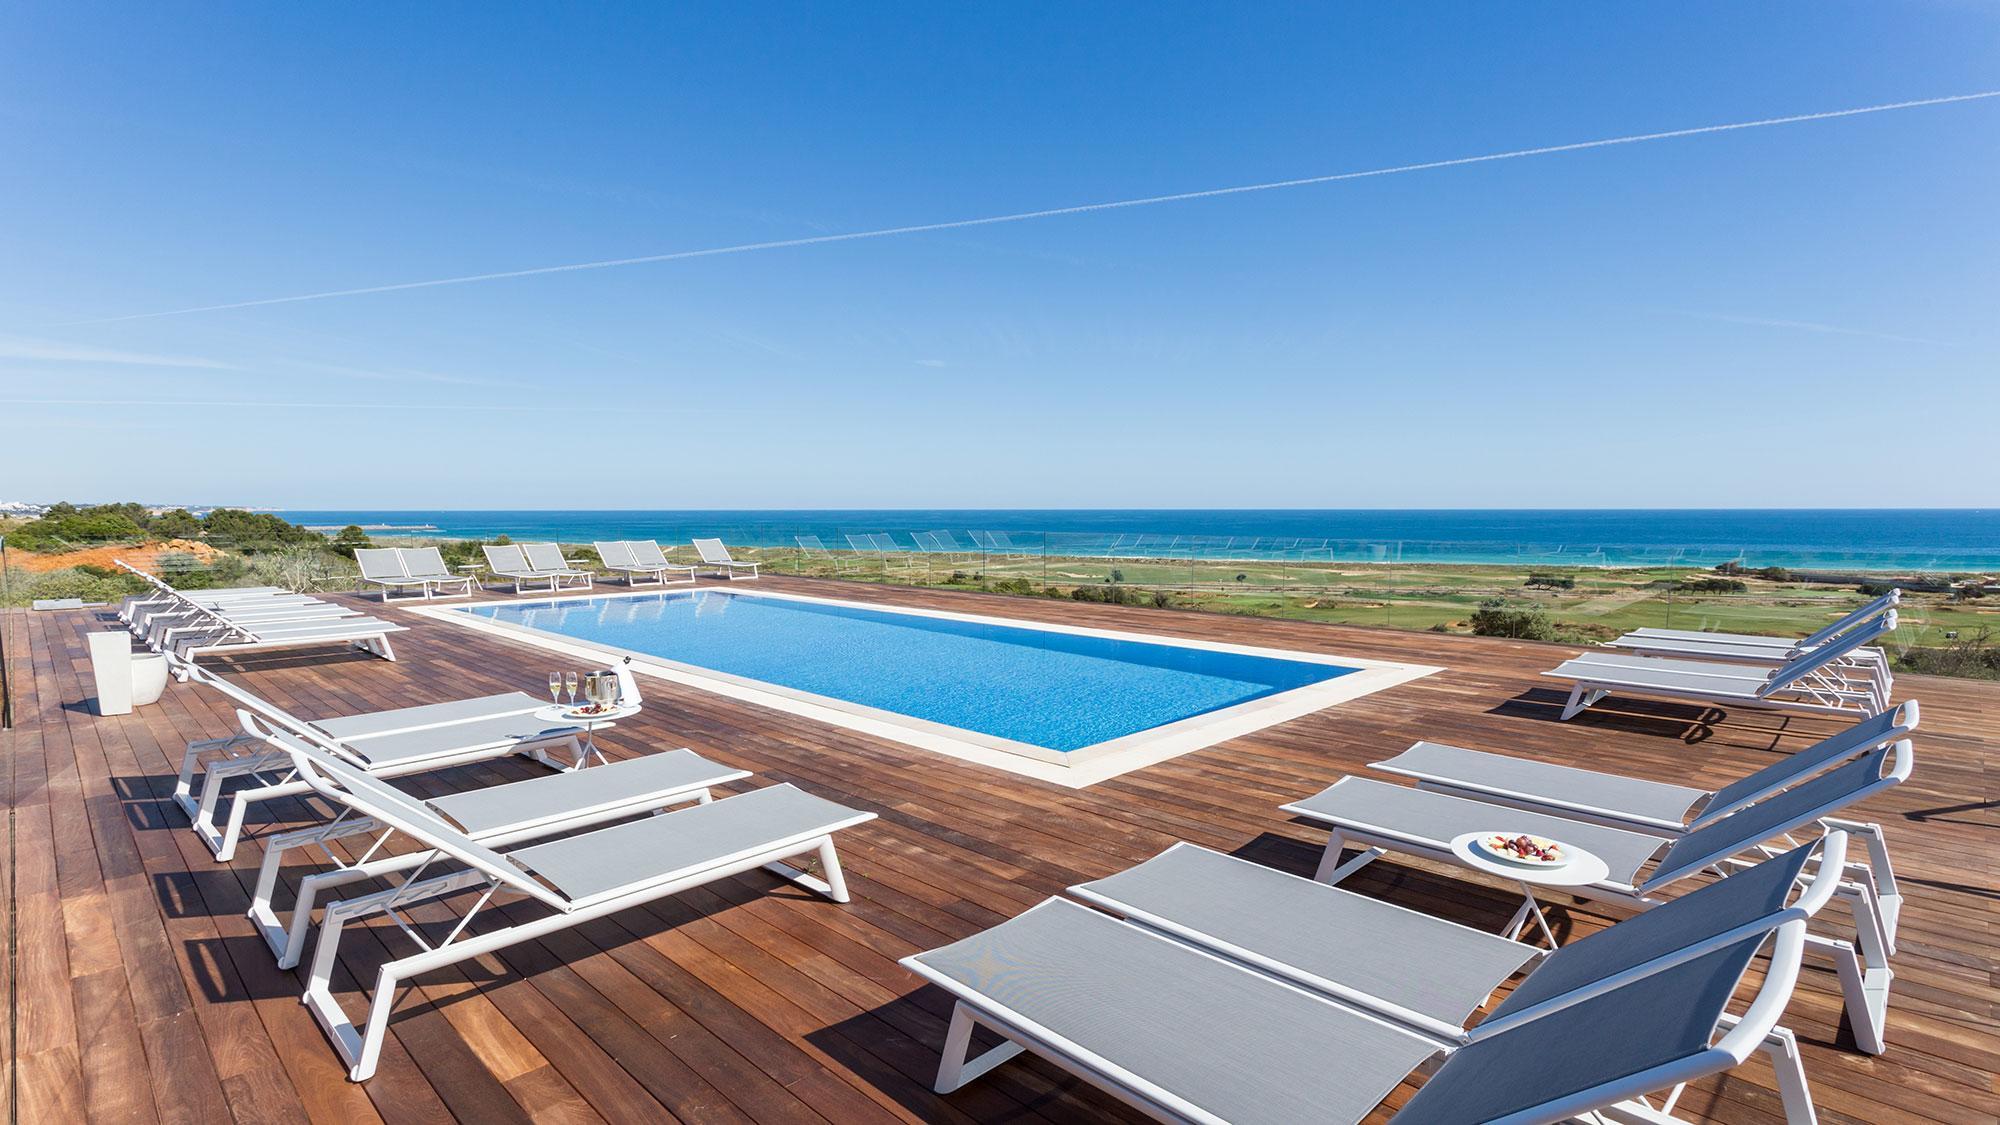 The Onyria Palmares Beach House Hotel's picturesque main pool in gorgeous Algarve.